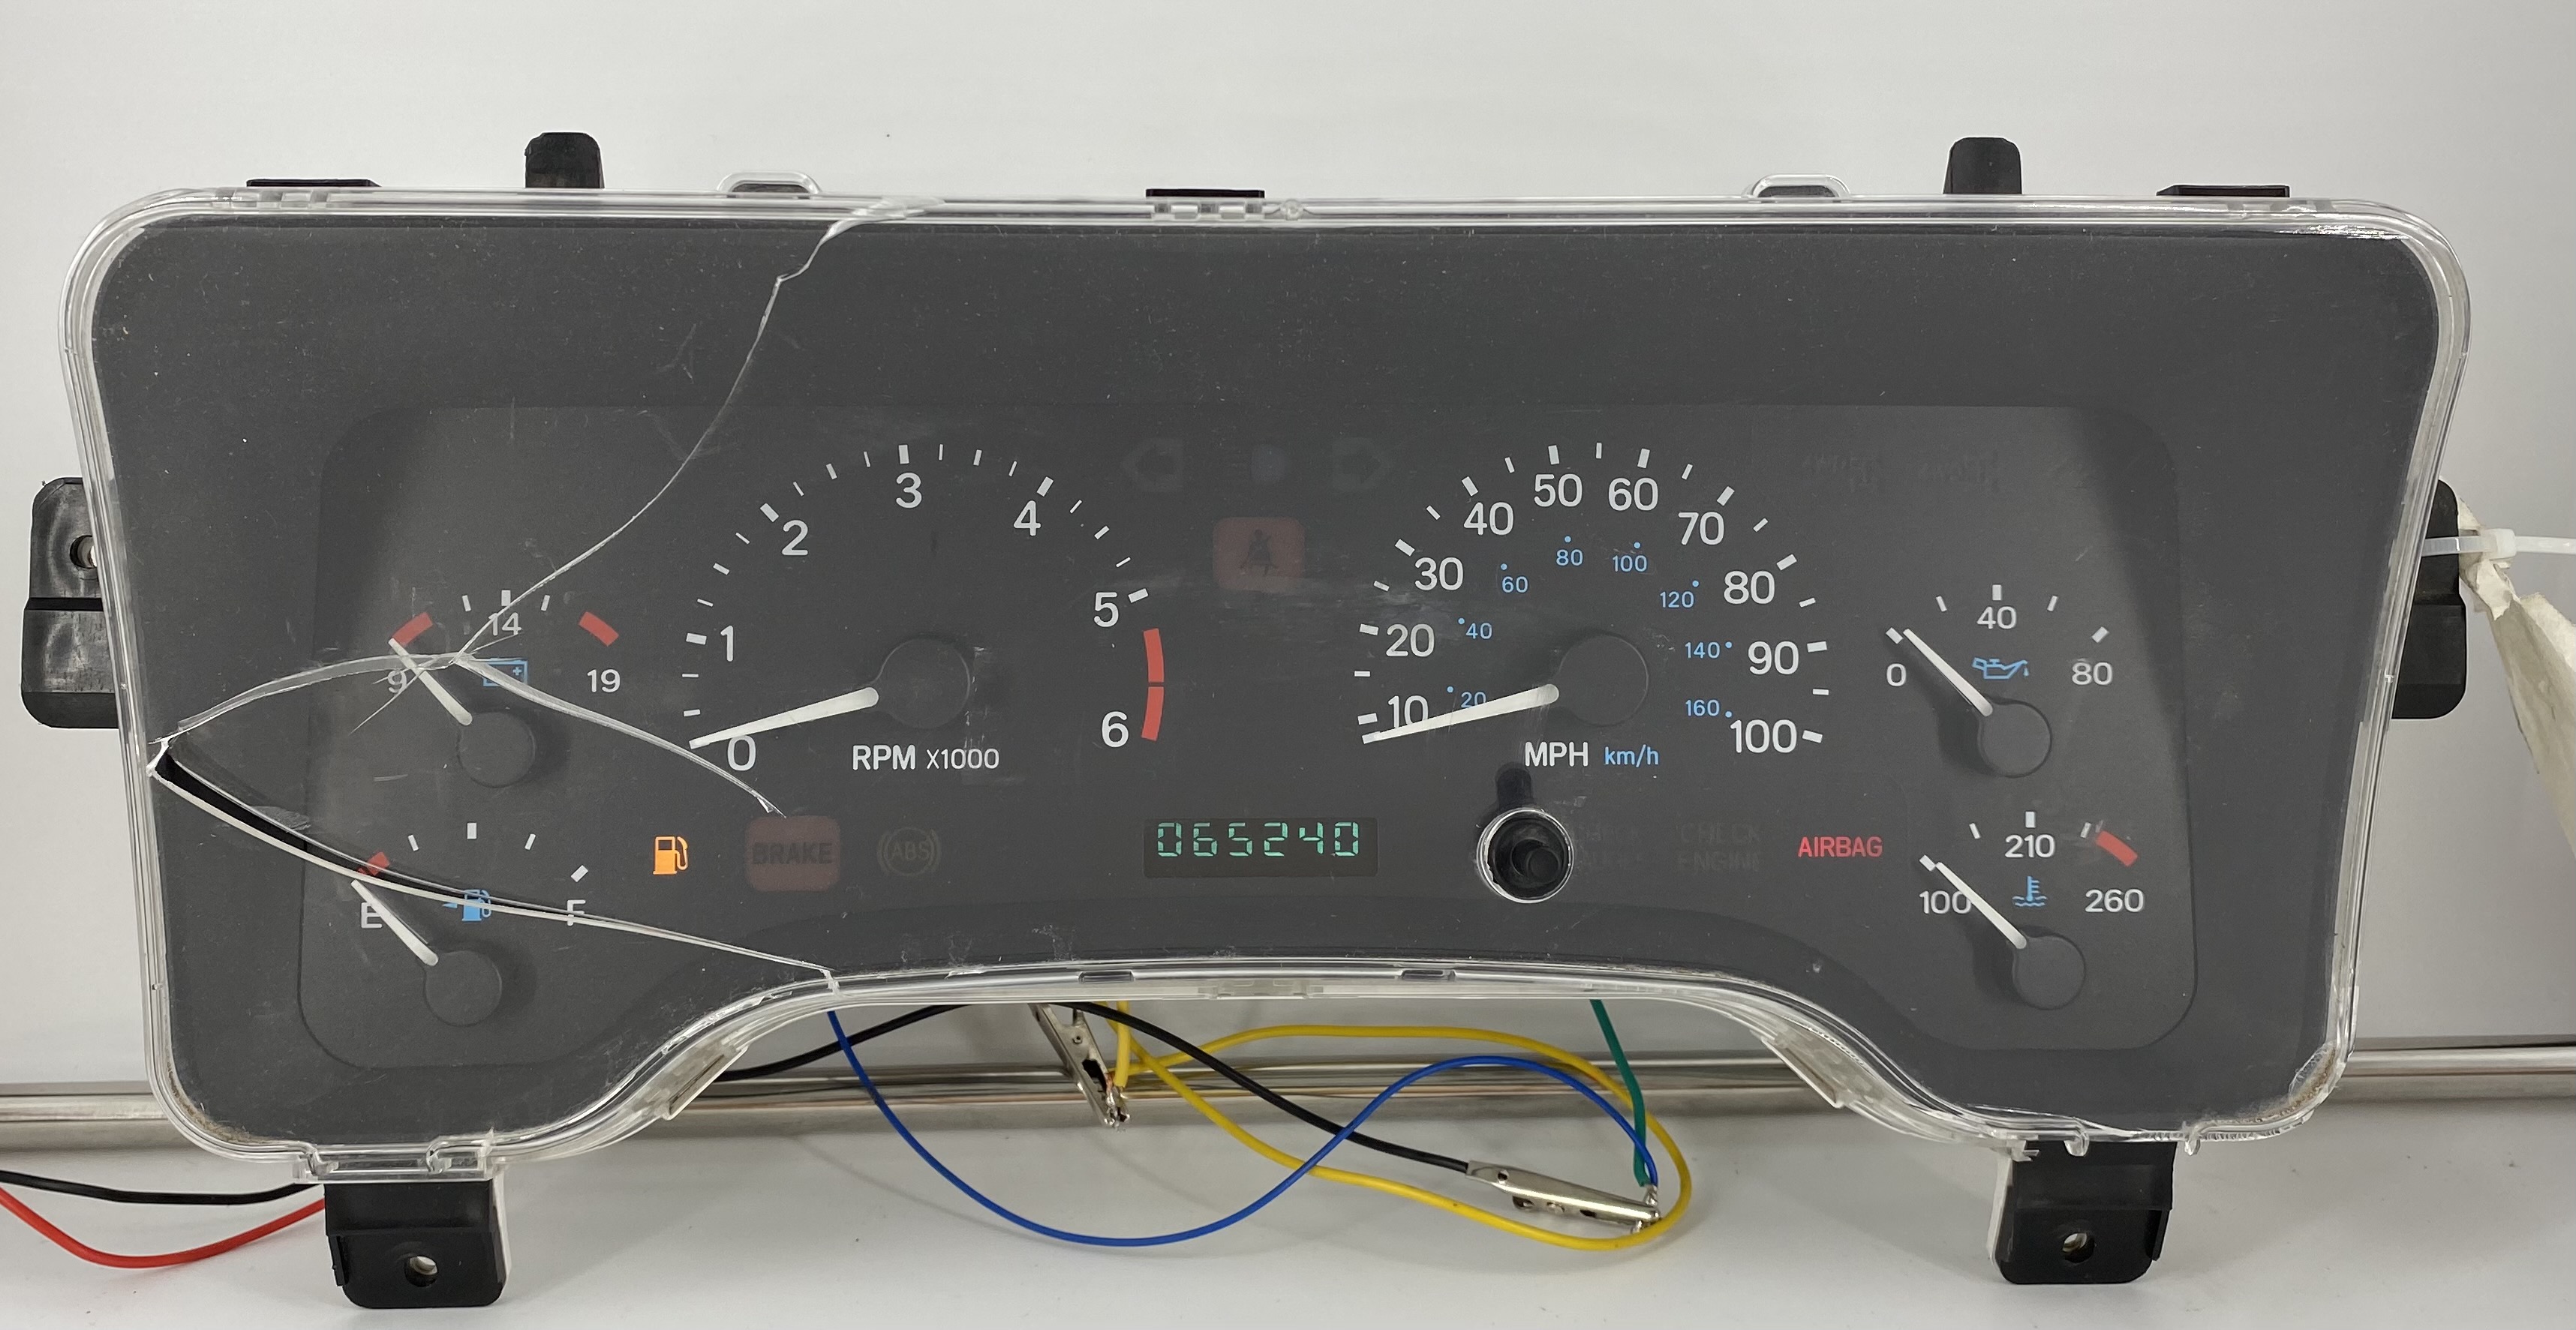 1997 JEEP WRANGLER USED DASHBOARD INSTRUMENT CLUSTER FOR SALE (MPH) -  DASHBOARD INSTRUMENT CLUSTER